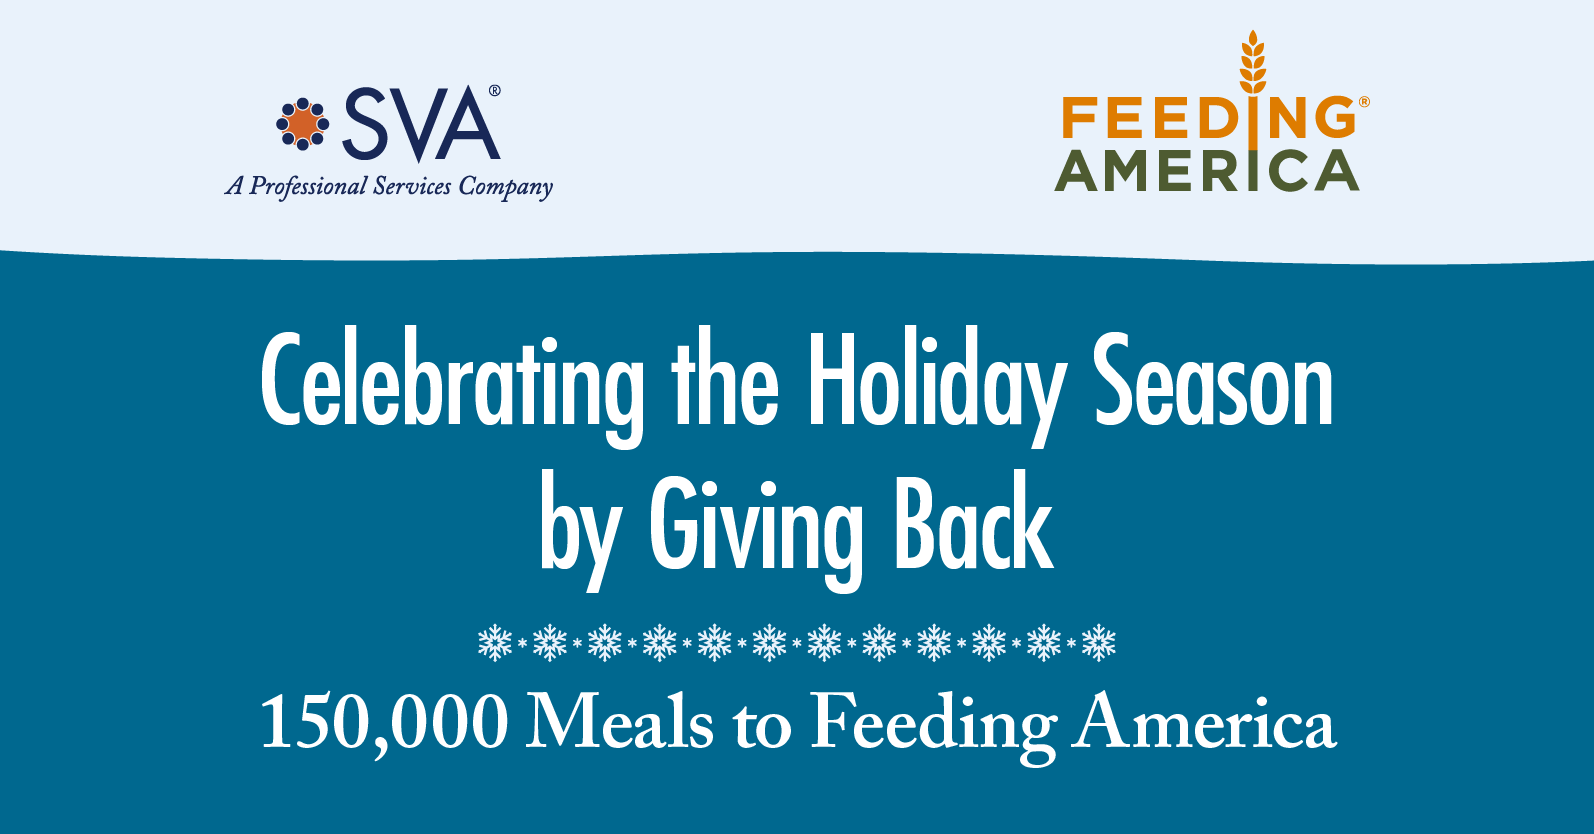 SVA is Celebrating the Holiday Season by Giving Back